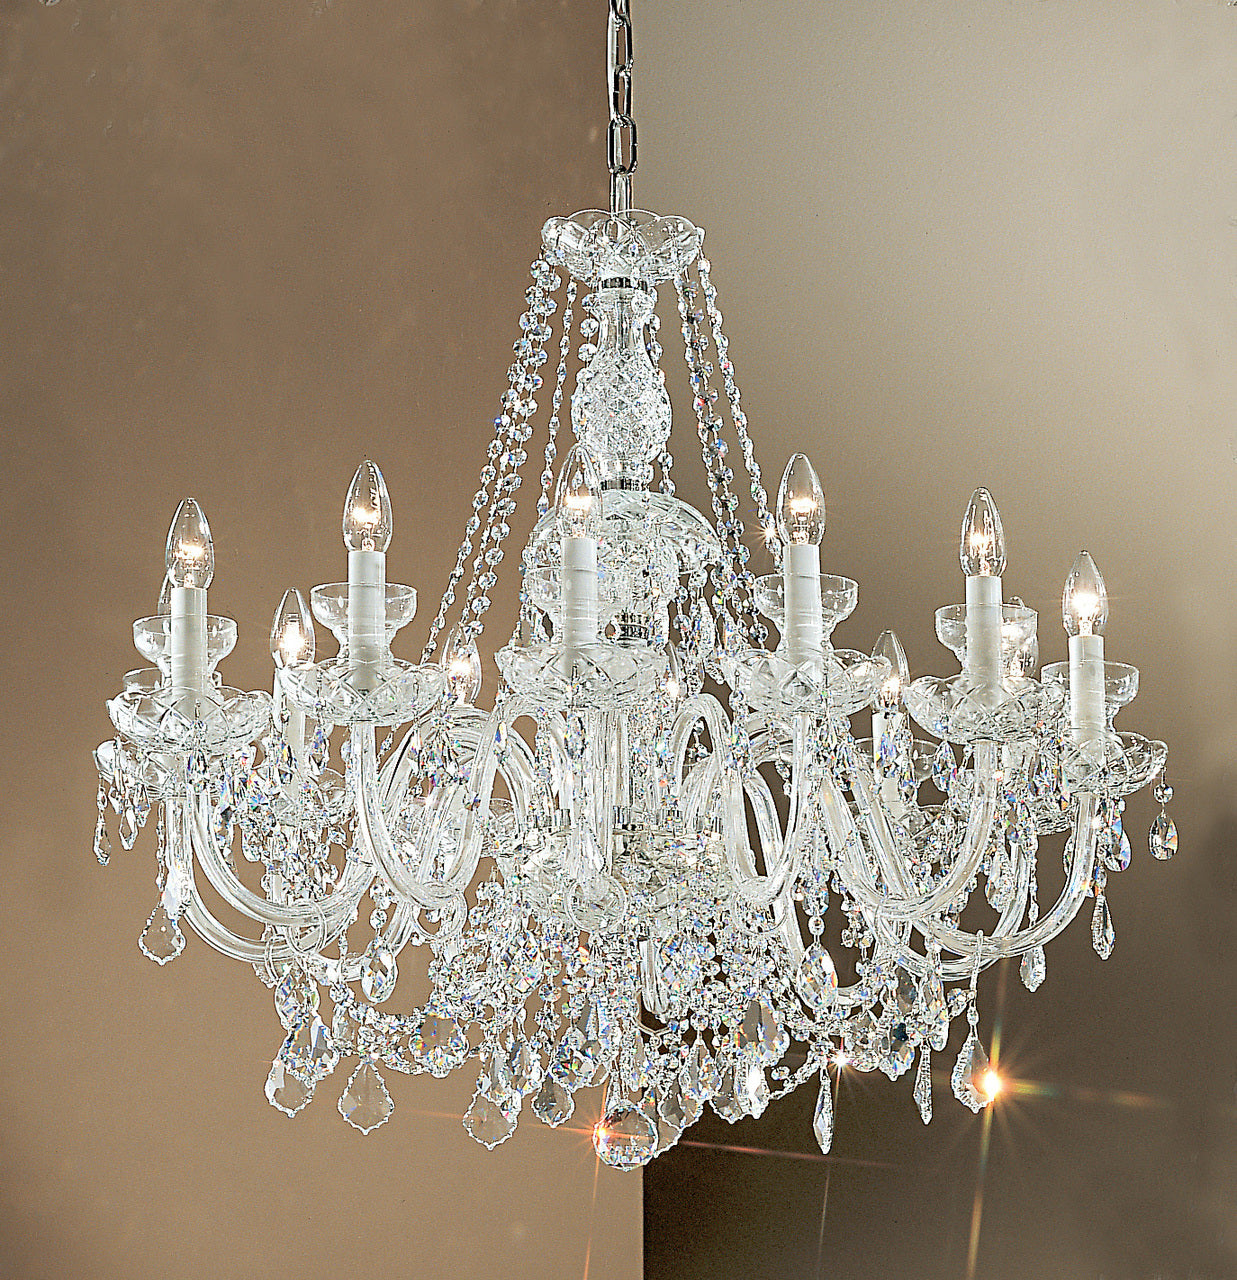 Classic Lighting 8276 CH C Bohemia Crystal/Glass Chandelier in Chrome (Imported from Italy)